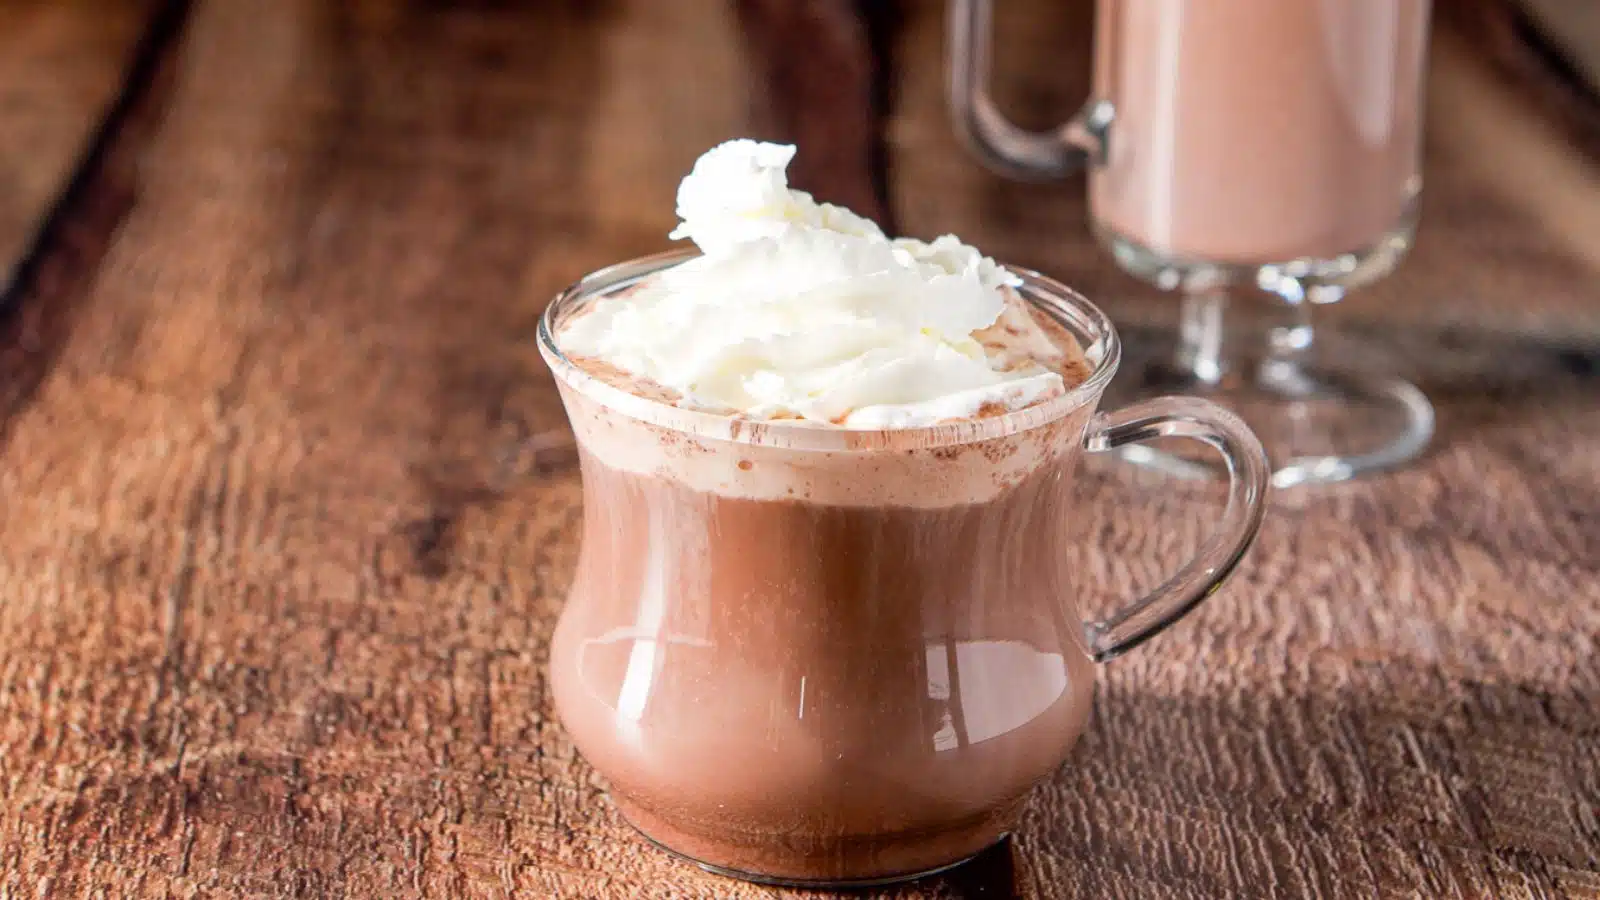 A glass tea cup with a hot chocolate drink and whipped cream on top